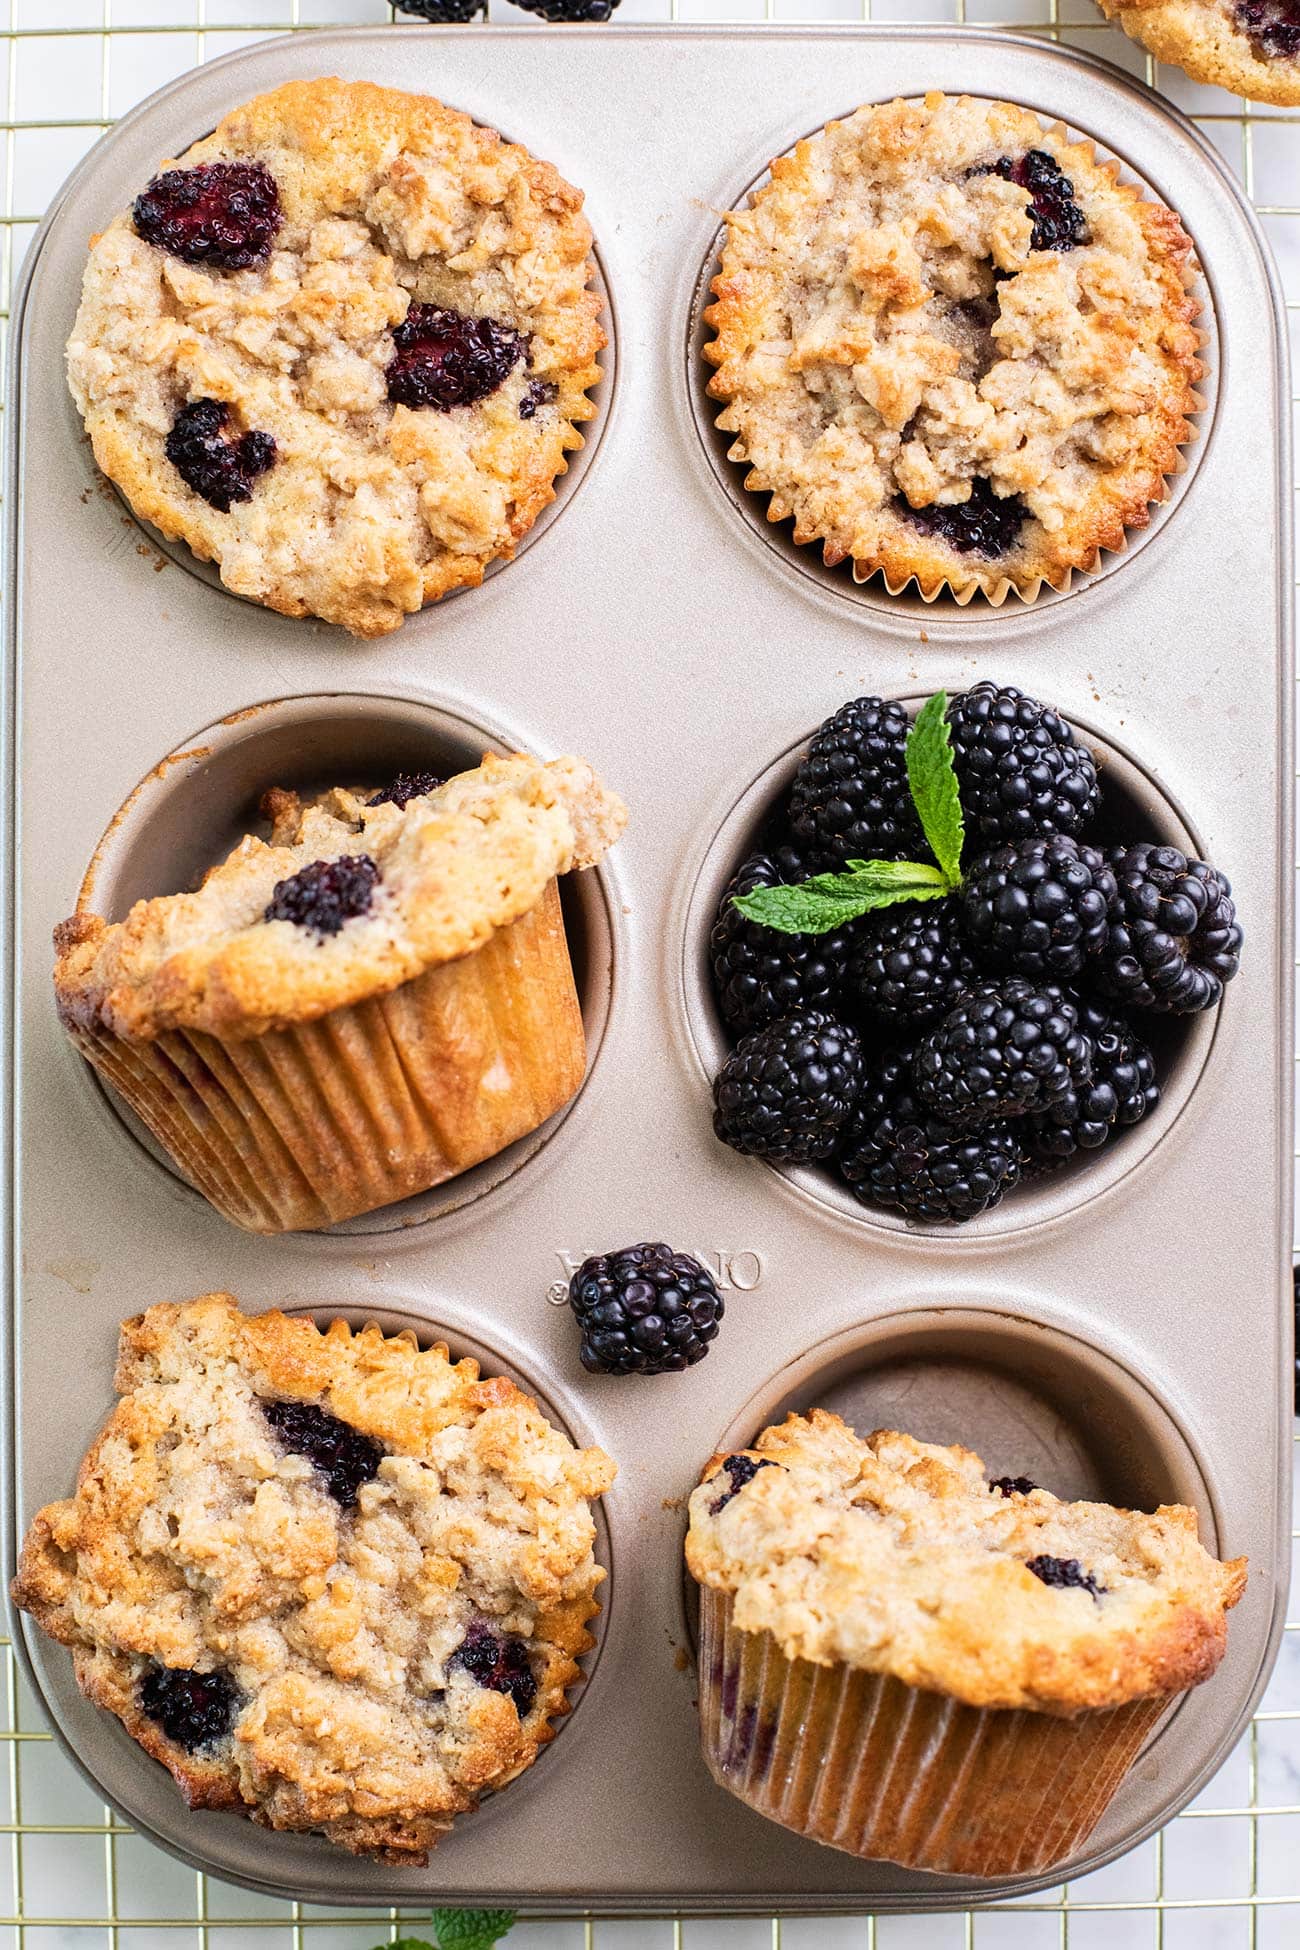 A muffin tin showing healthy blackberry muffins with a golden brown oat topping.